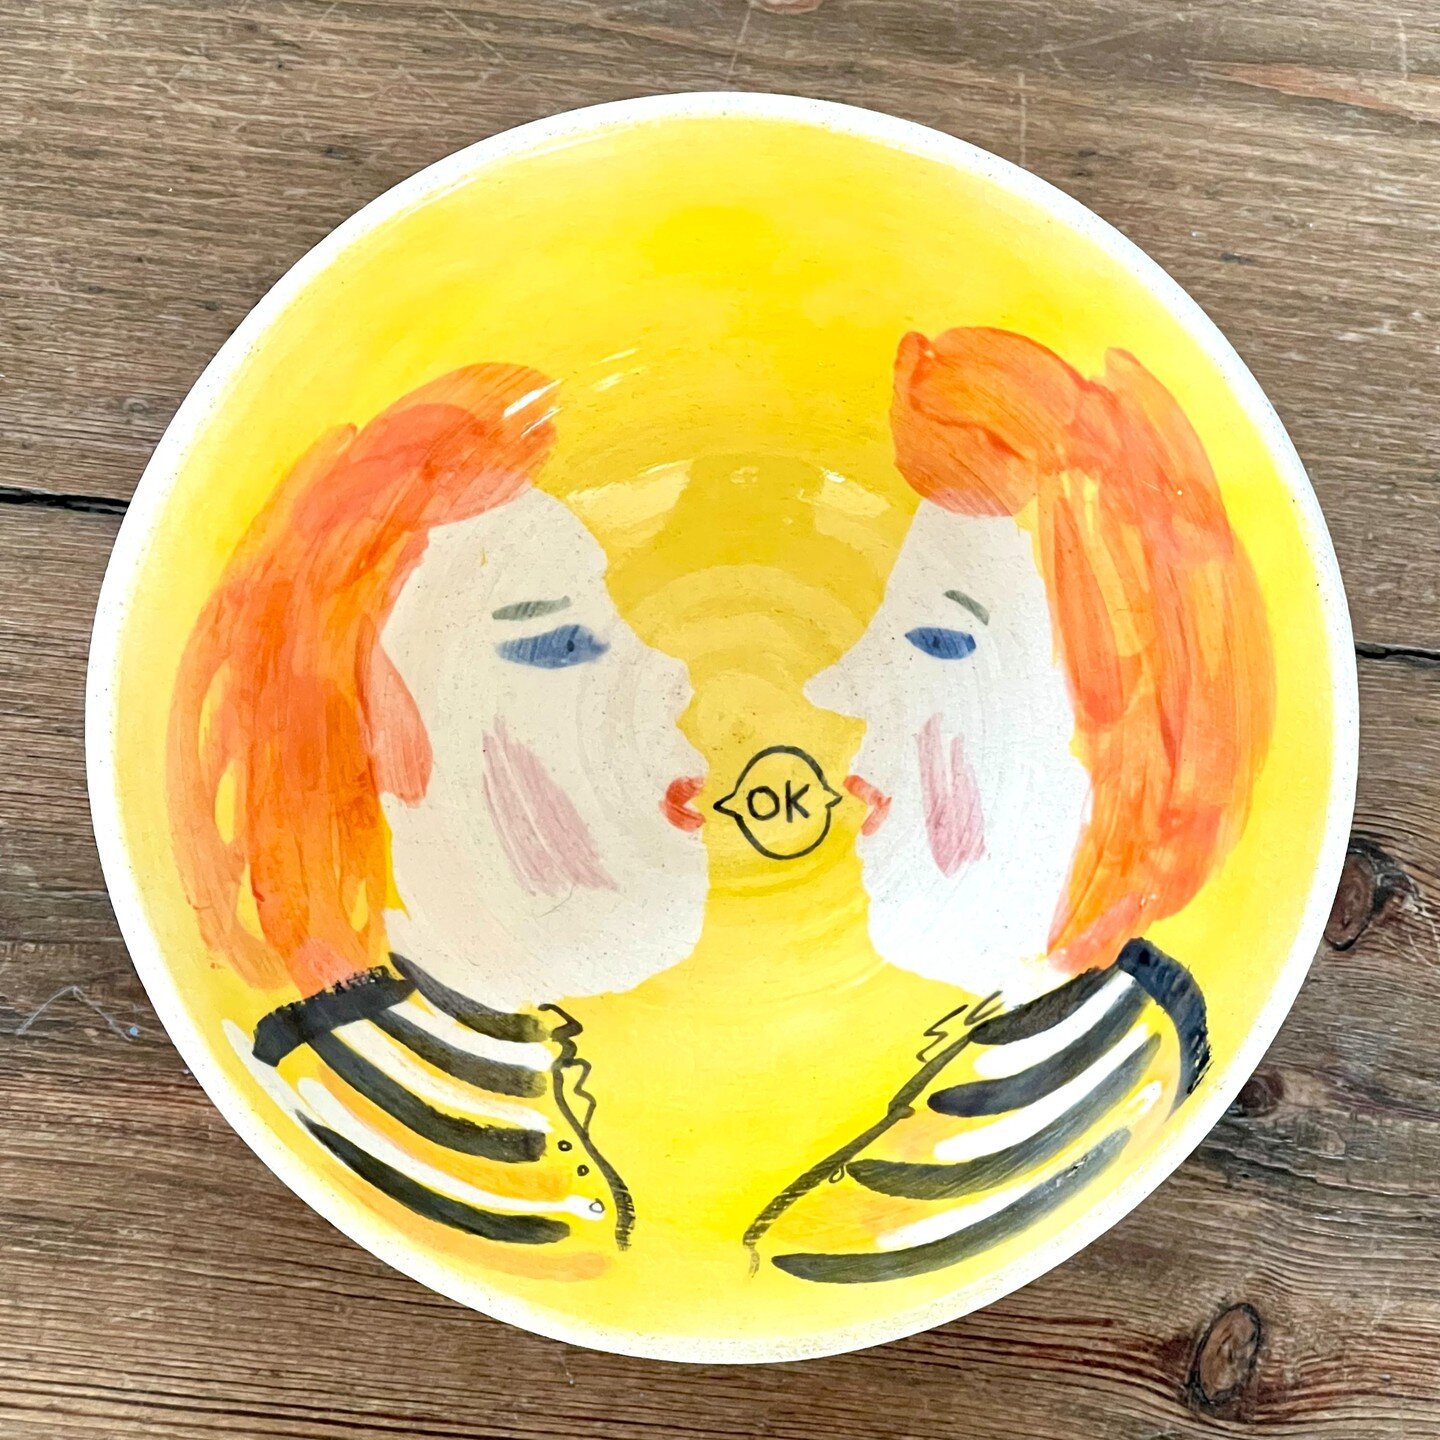 More glazed bowl tests with @india_beat. Ok. Moving on to a whole load more soooon! What would you like to see? Can i even paint it? #artschool #painting #ceramics #7yearstraining #bowl #OK! #illustration #cute #mangled #cantpaint